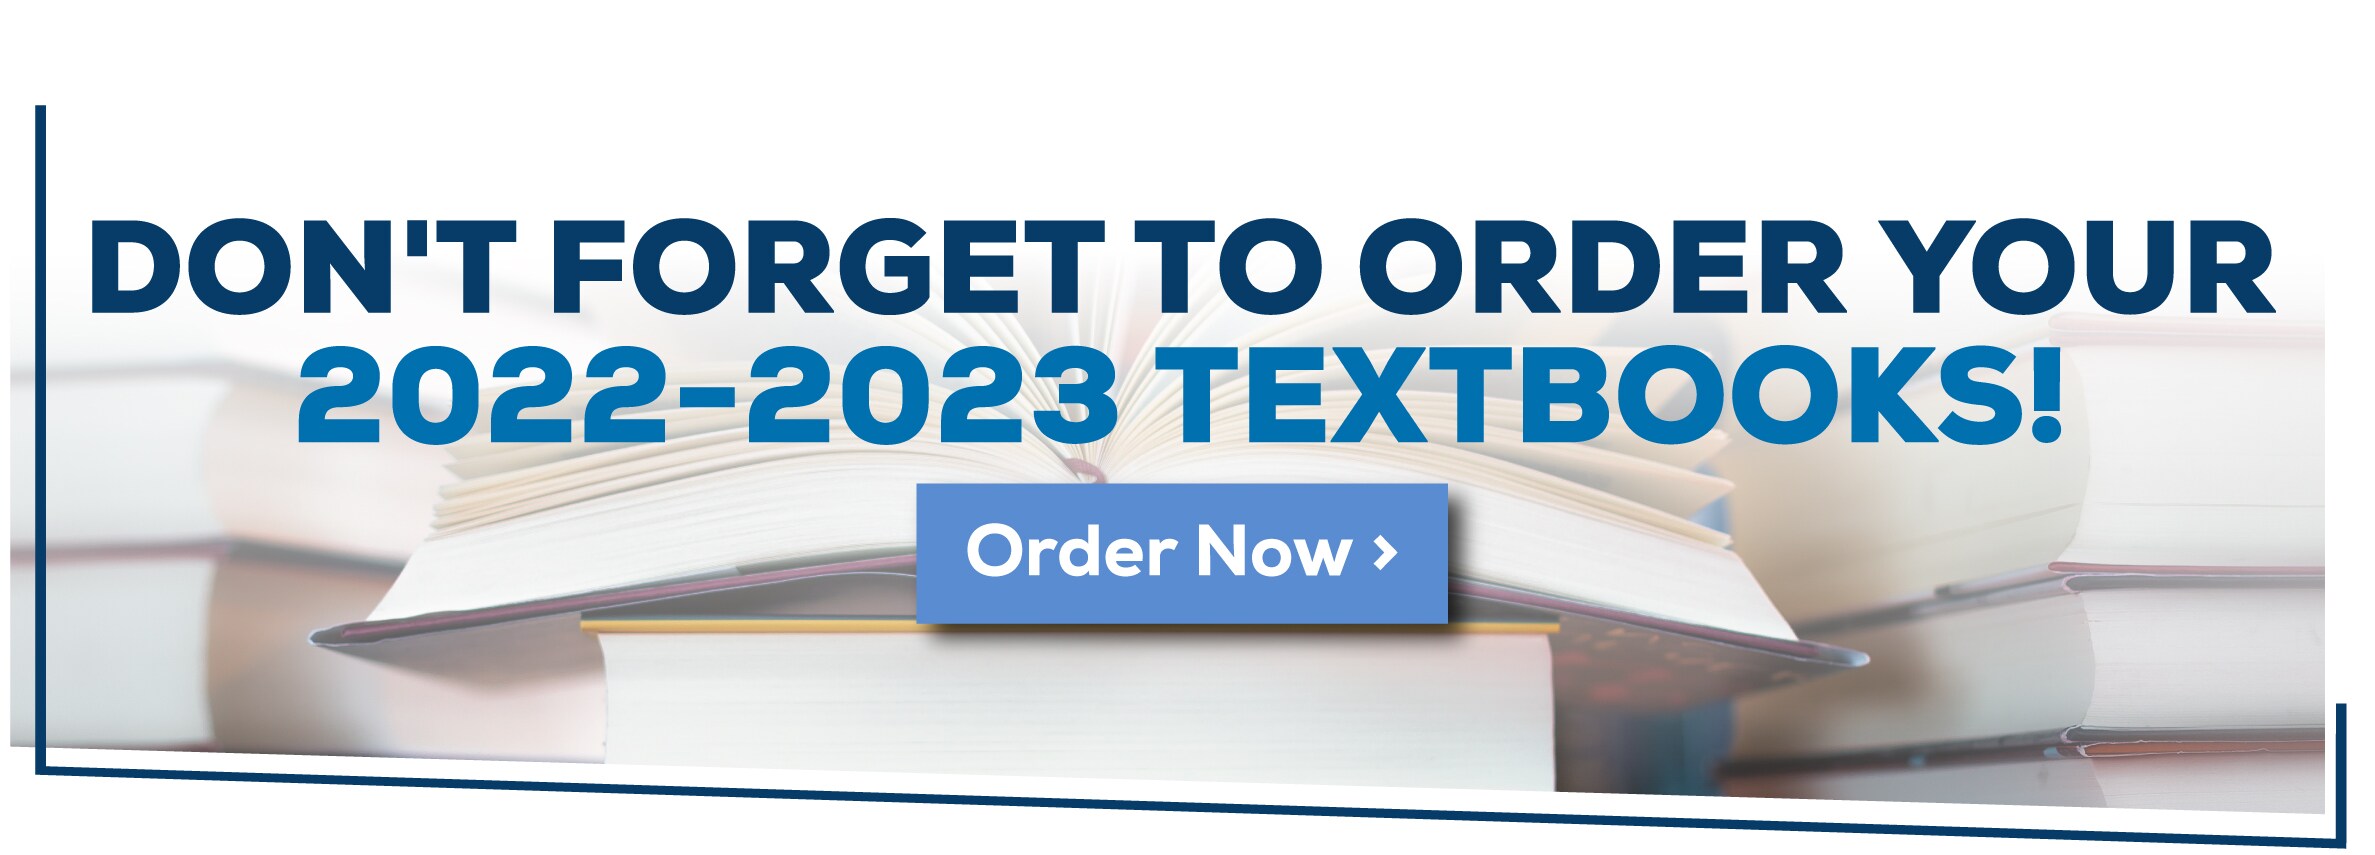 Don't forget to order your 2022-2023 textbooks! Order Now!						